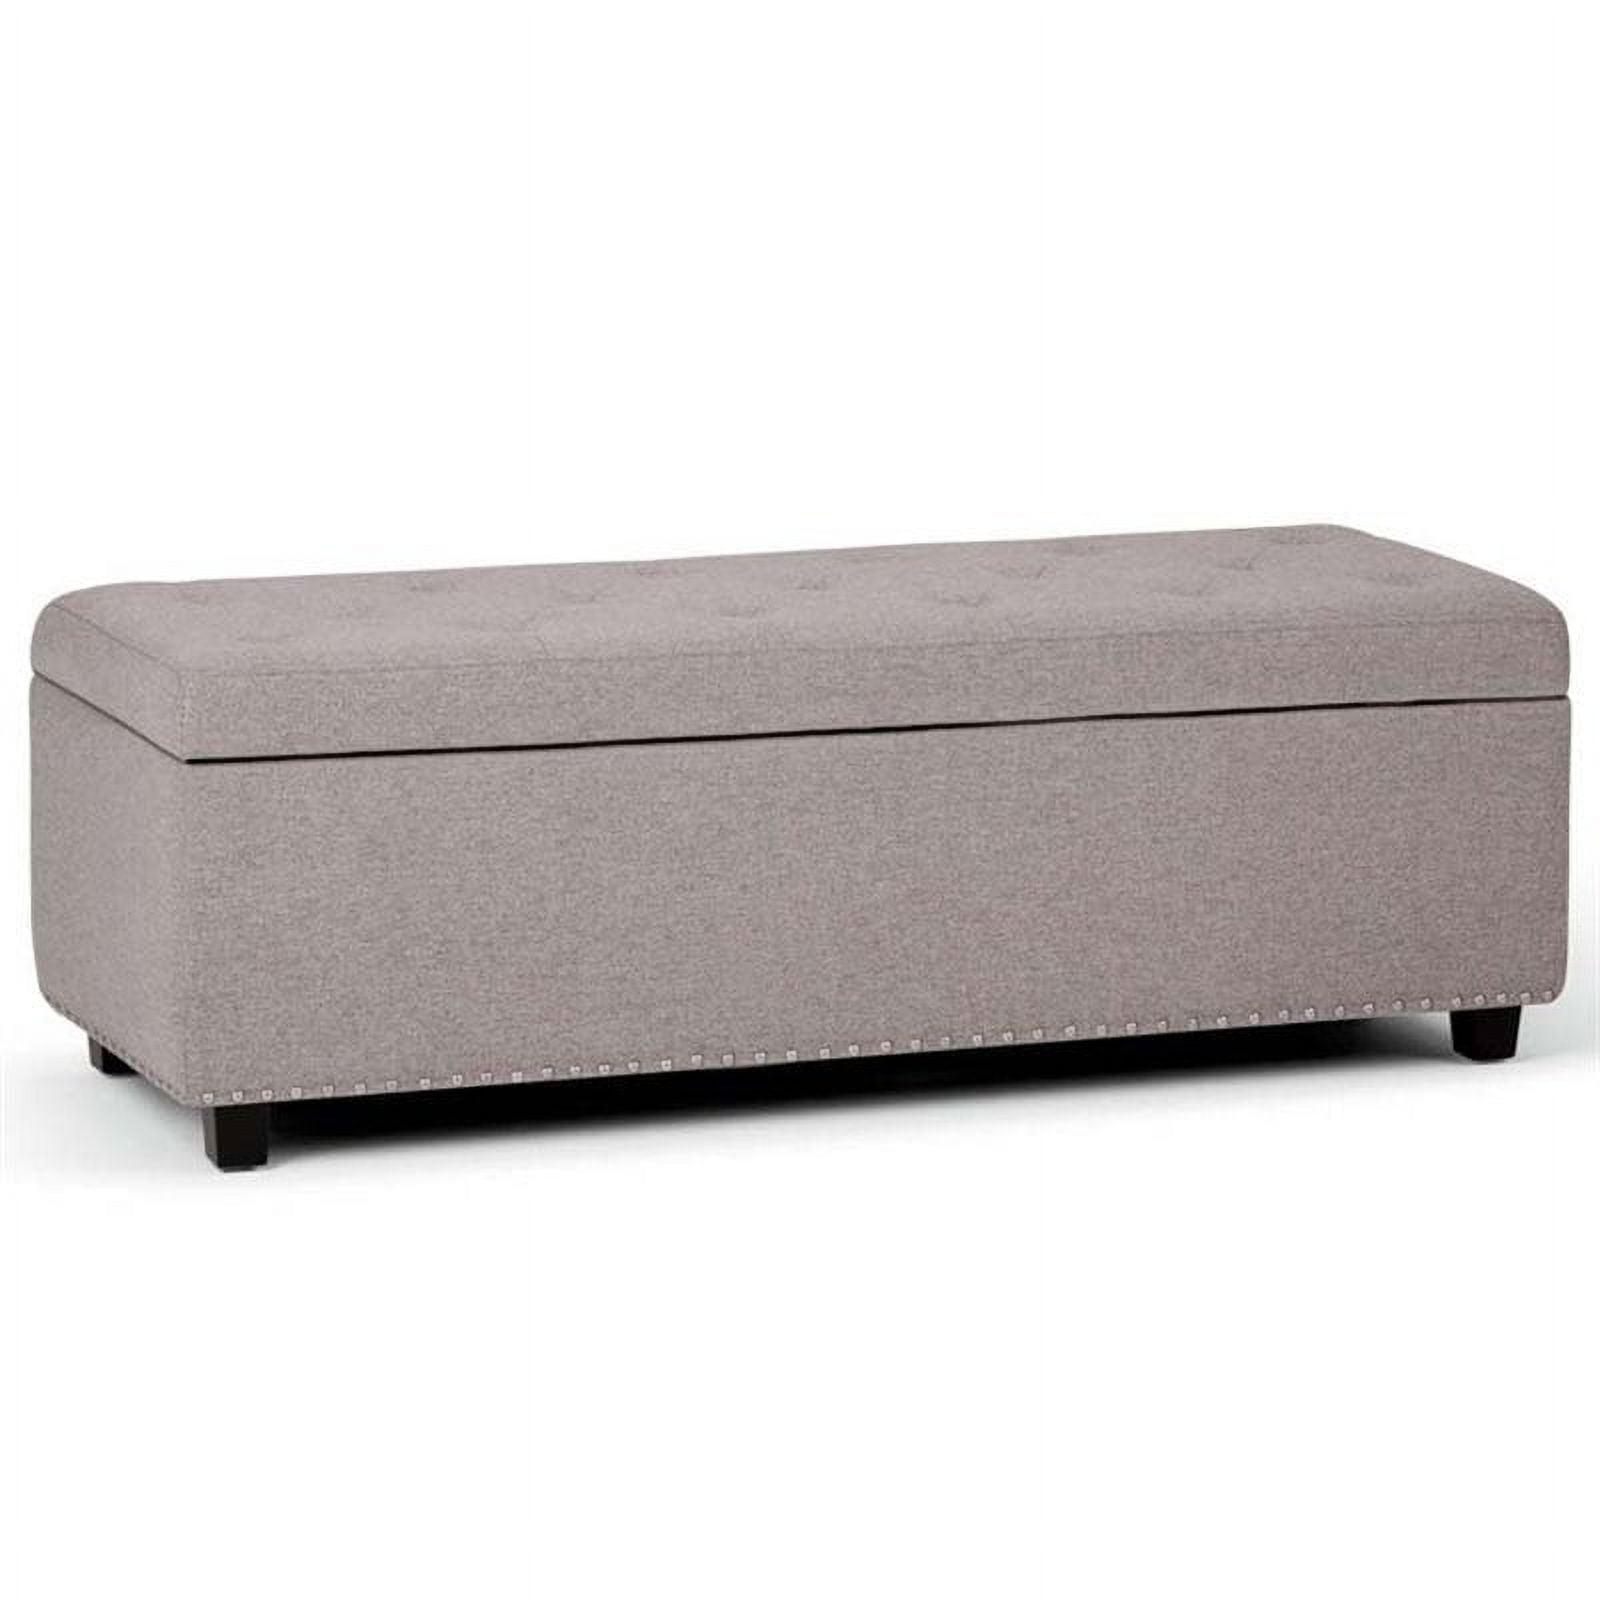 Cloud Gray Tufted Wood Footstool with Nail Trim - Traditional Style